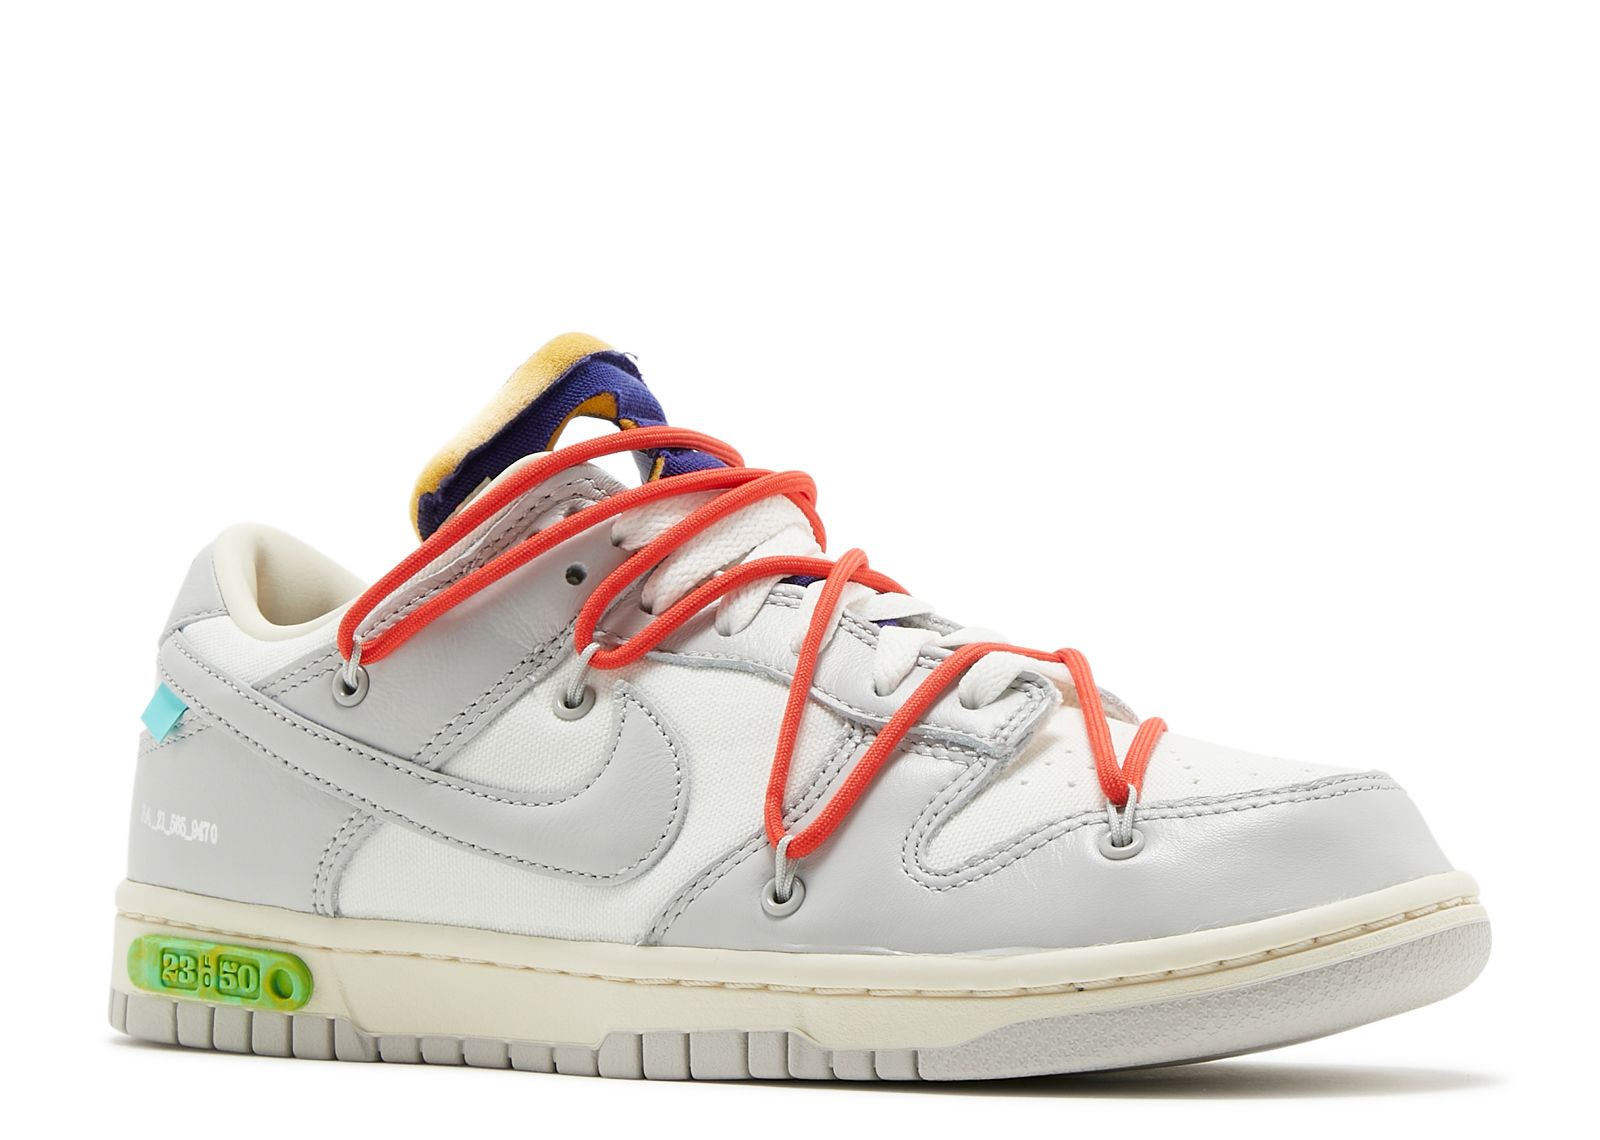 Off White X Dunk Low 'Lot 23 Of 50' - Nike - DM1602 126 - sail 